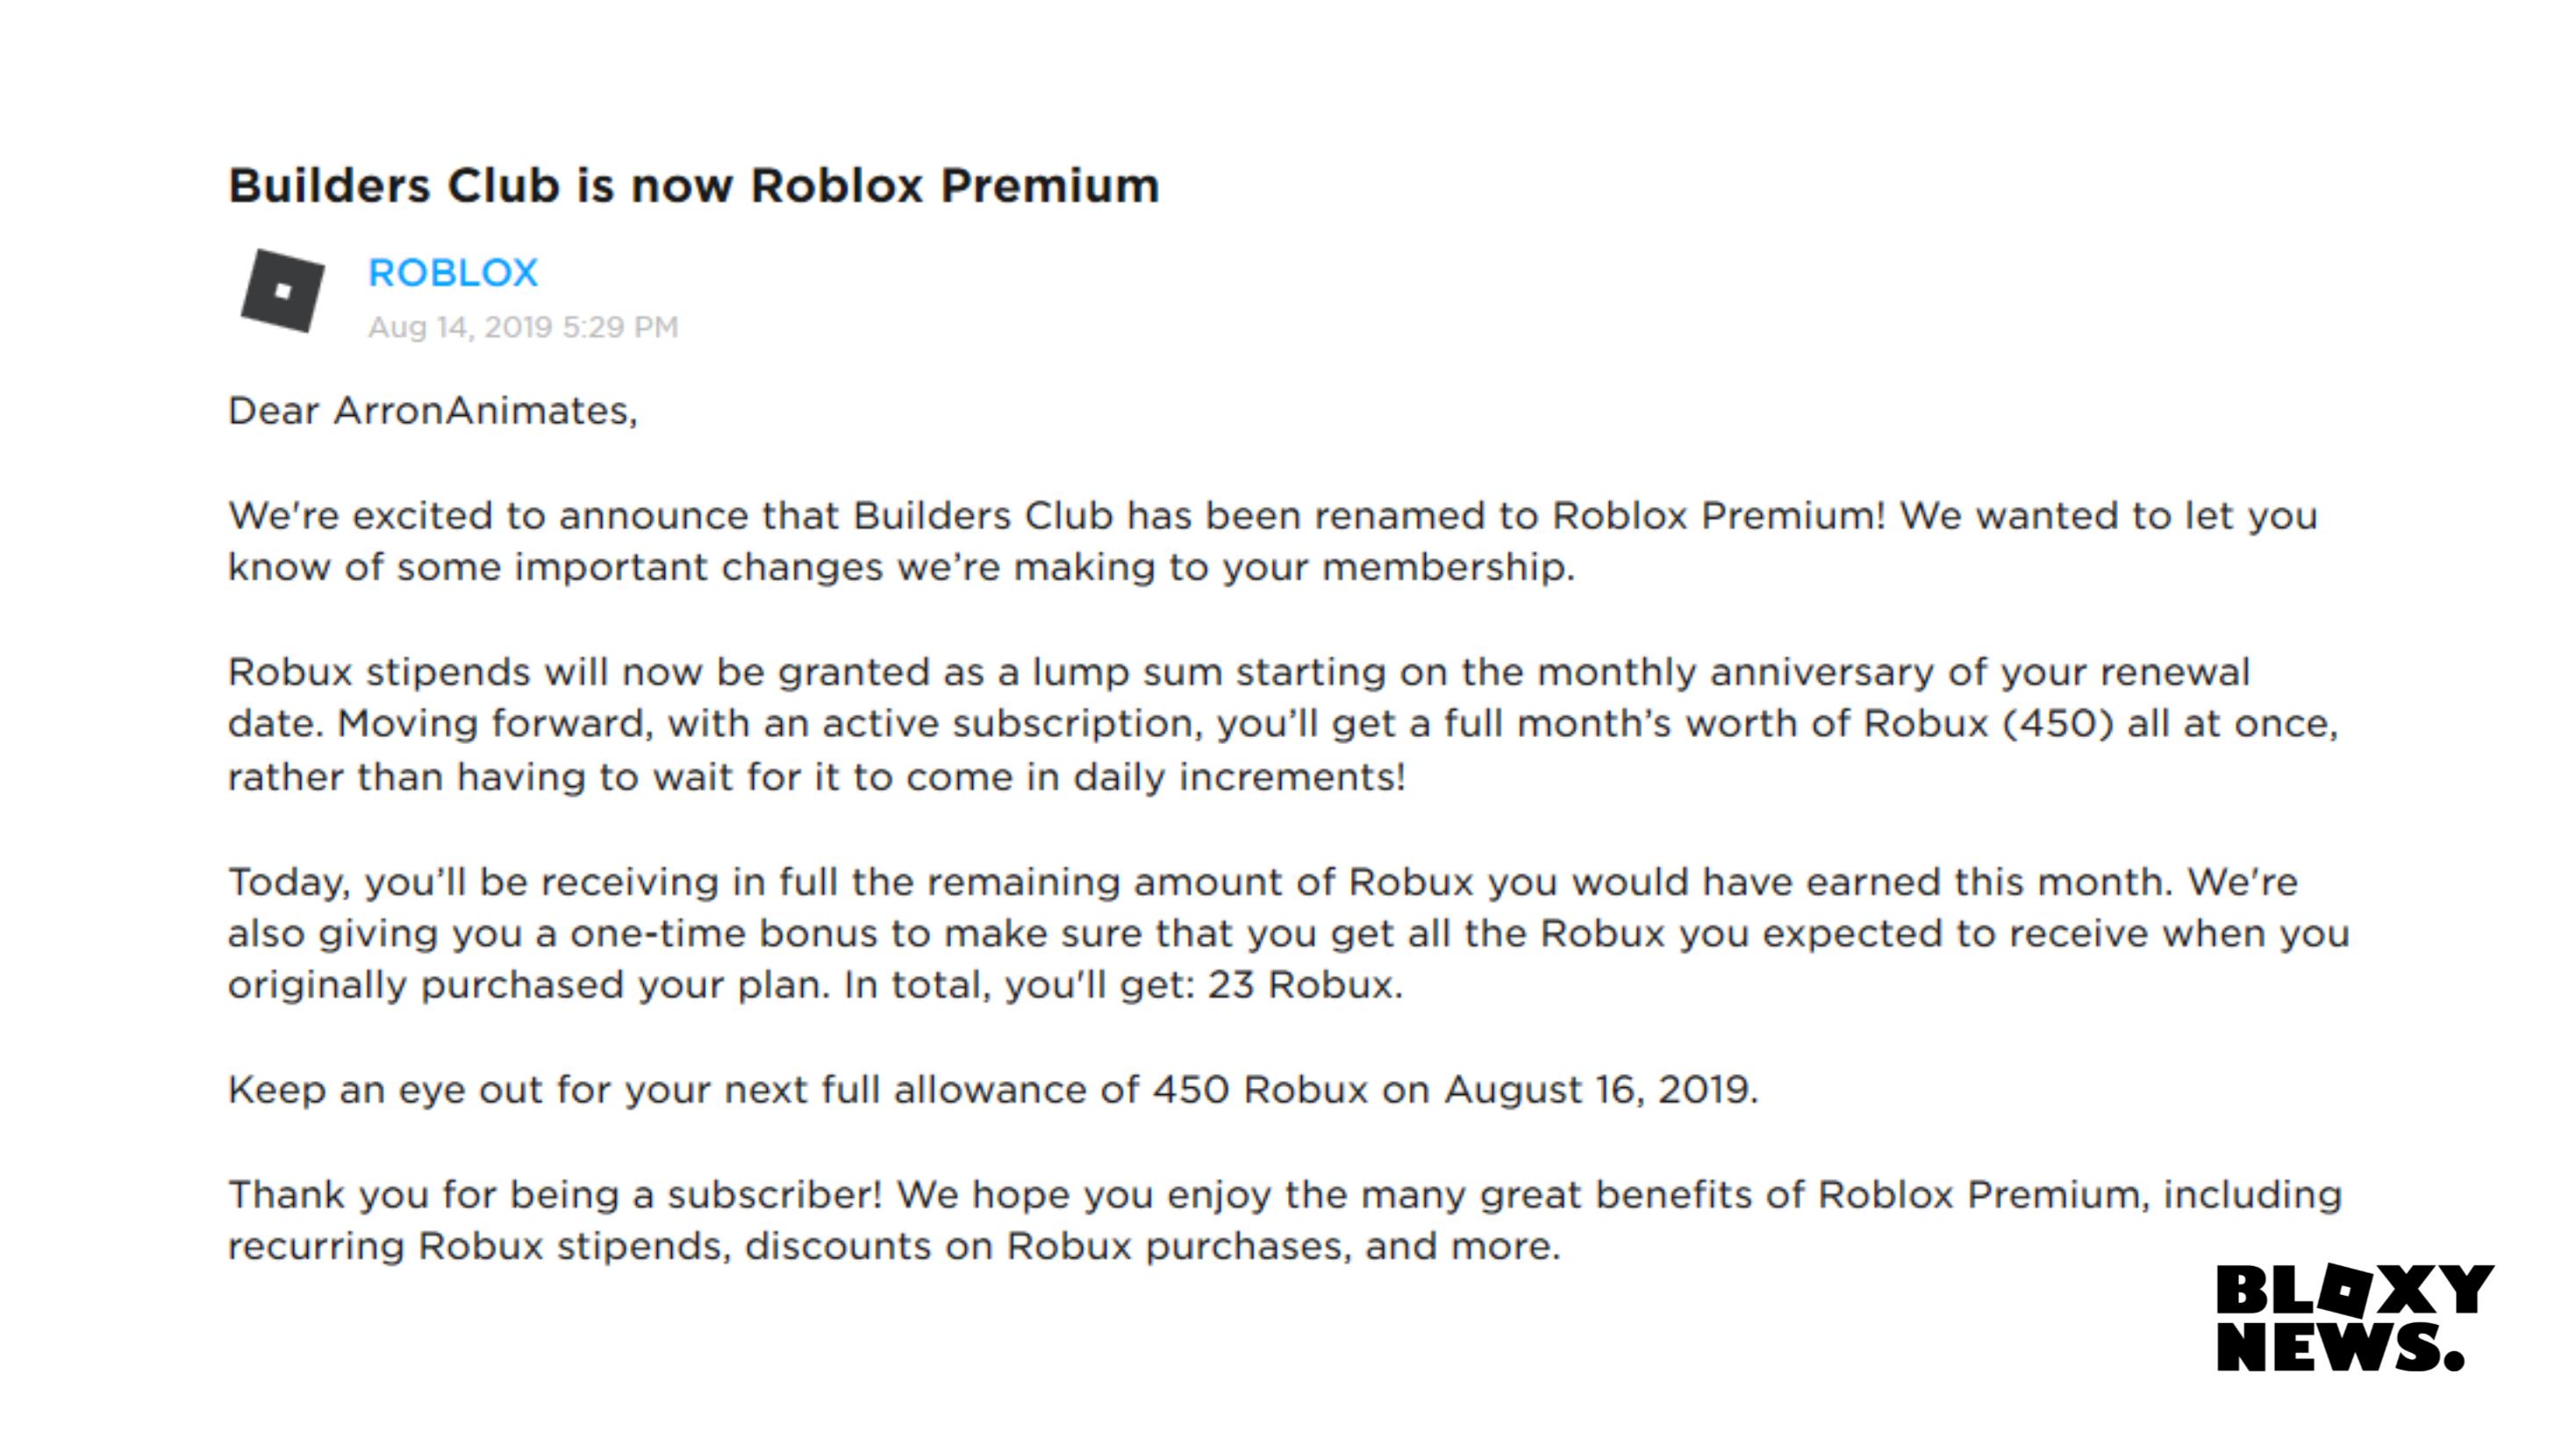 Bloxy News On Twitter Bloxynews Here Is What The Roblox Premium Page Will Look Like The Second Picture Is The Message You Will Receive When Builders Club Officially Changes To Premium - roblox premium 450 when do i get robux